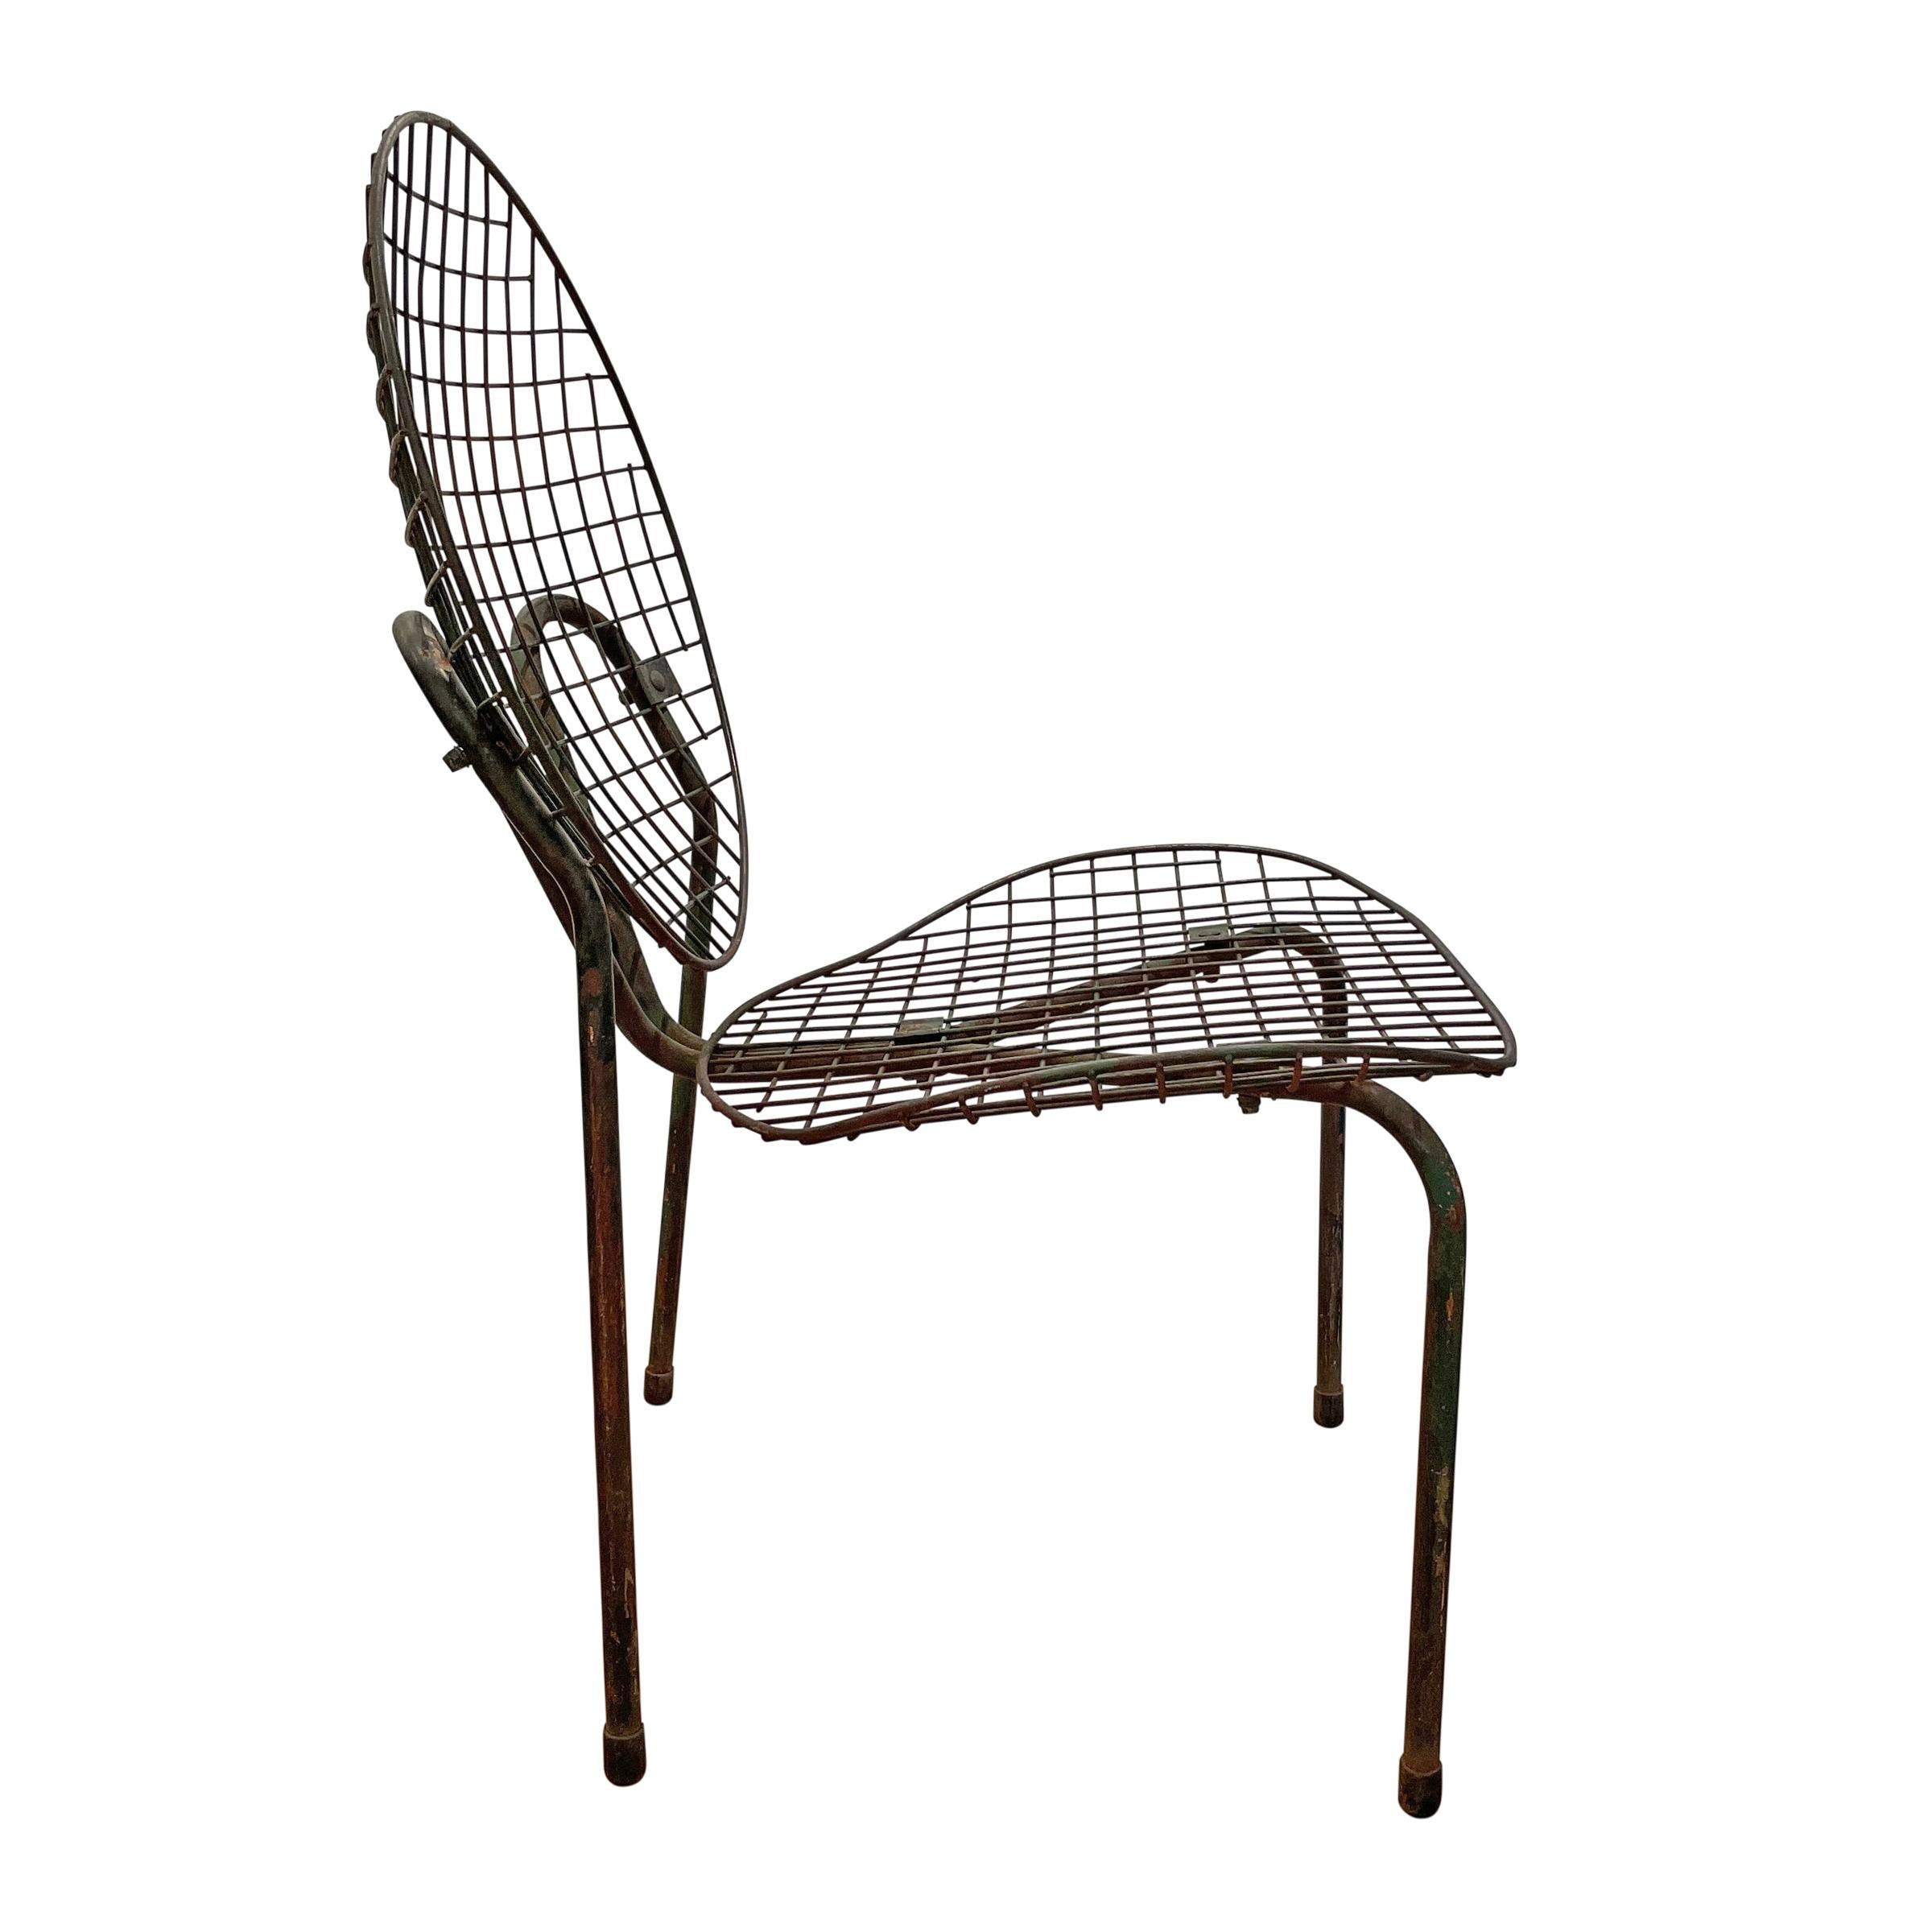 Pair of French Garden Chairs 1